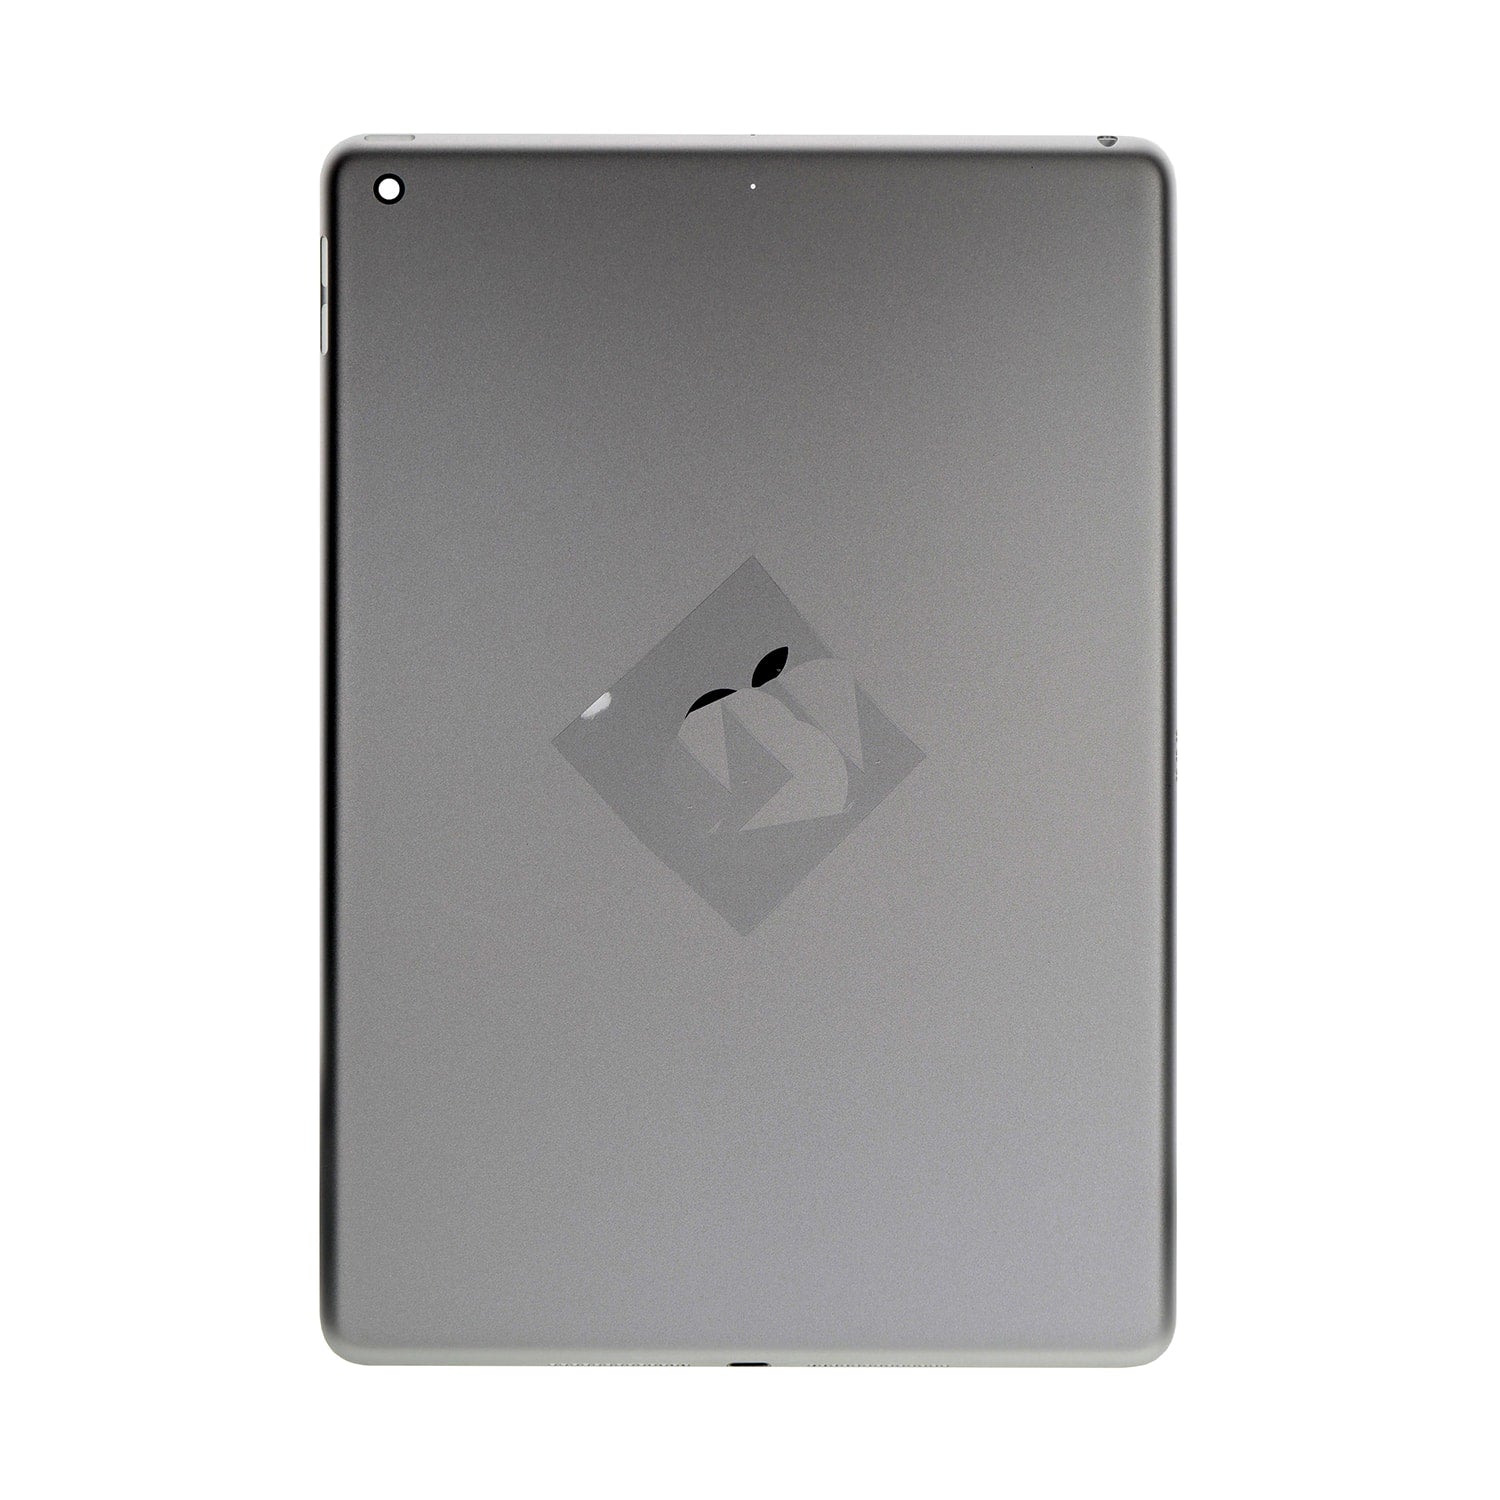 GREY BACK COVER (WIFI VERSION) FOR IPAD 7TH/8TH